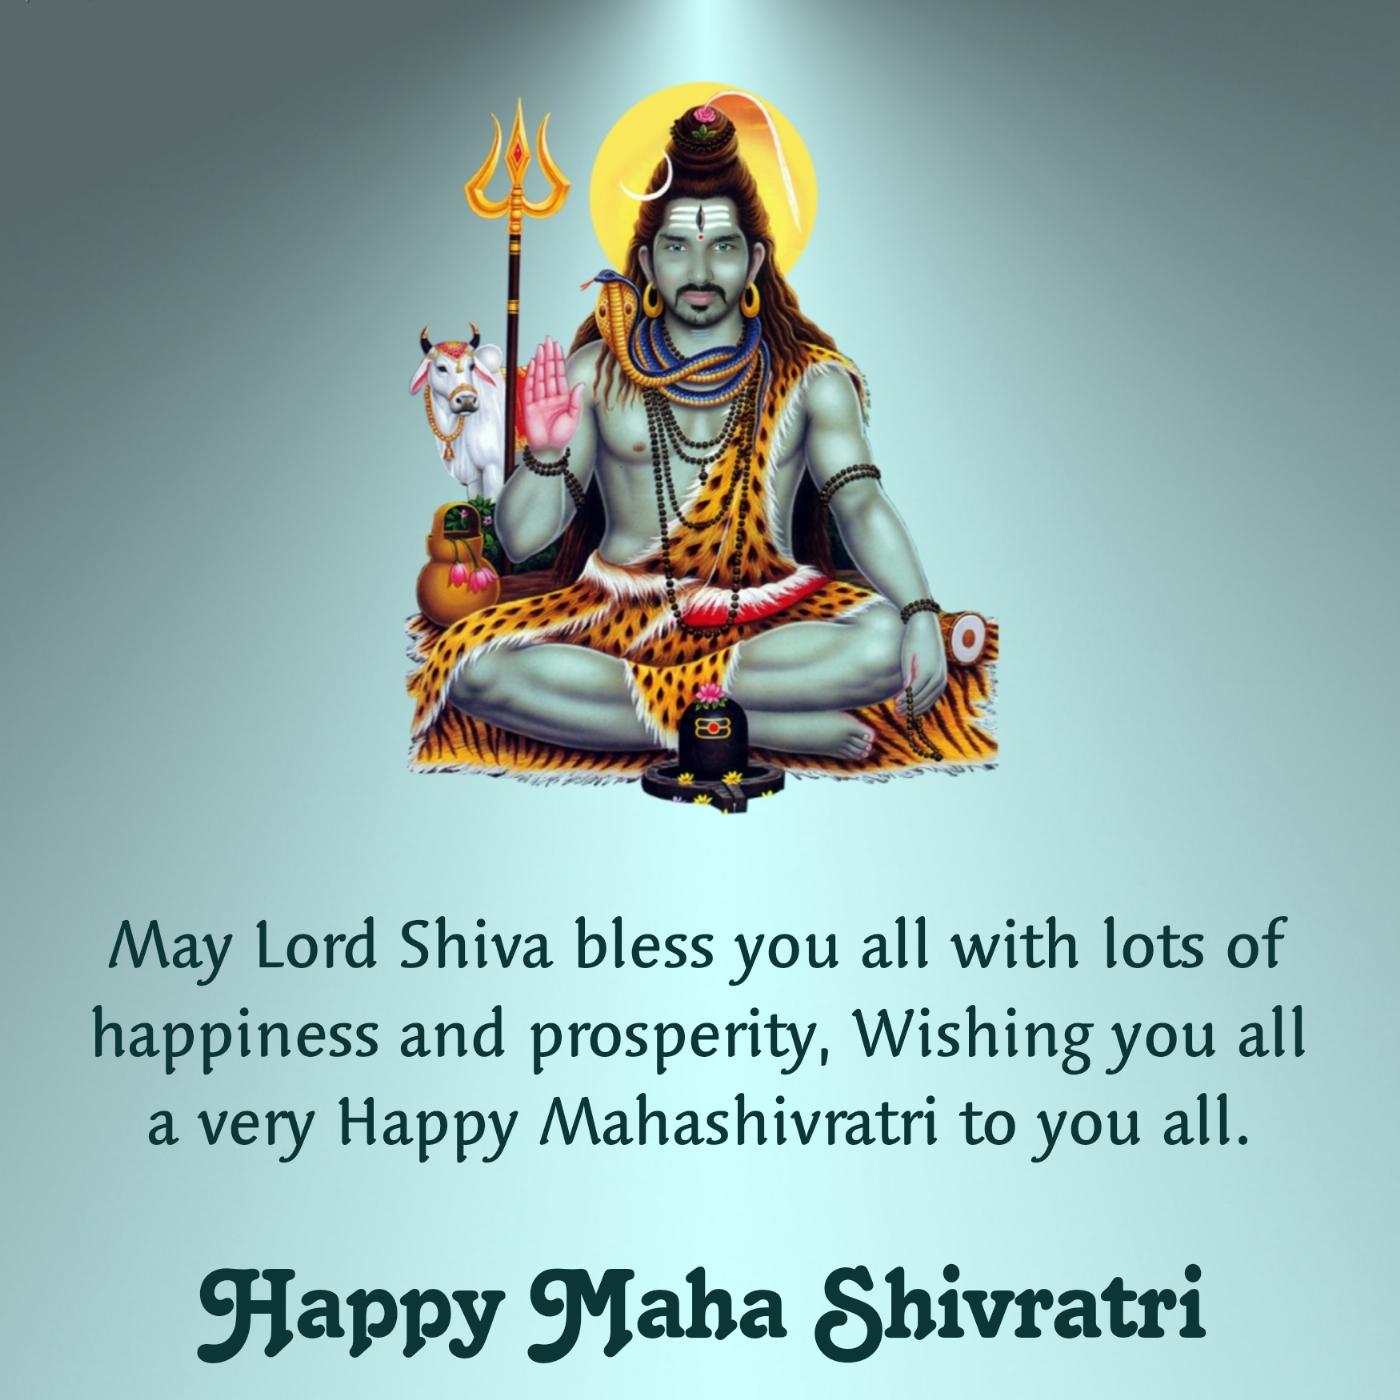 May Lord Shiva bless you all with lots of happiness and prosperity